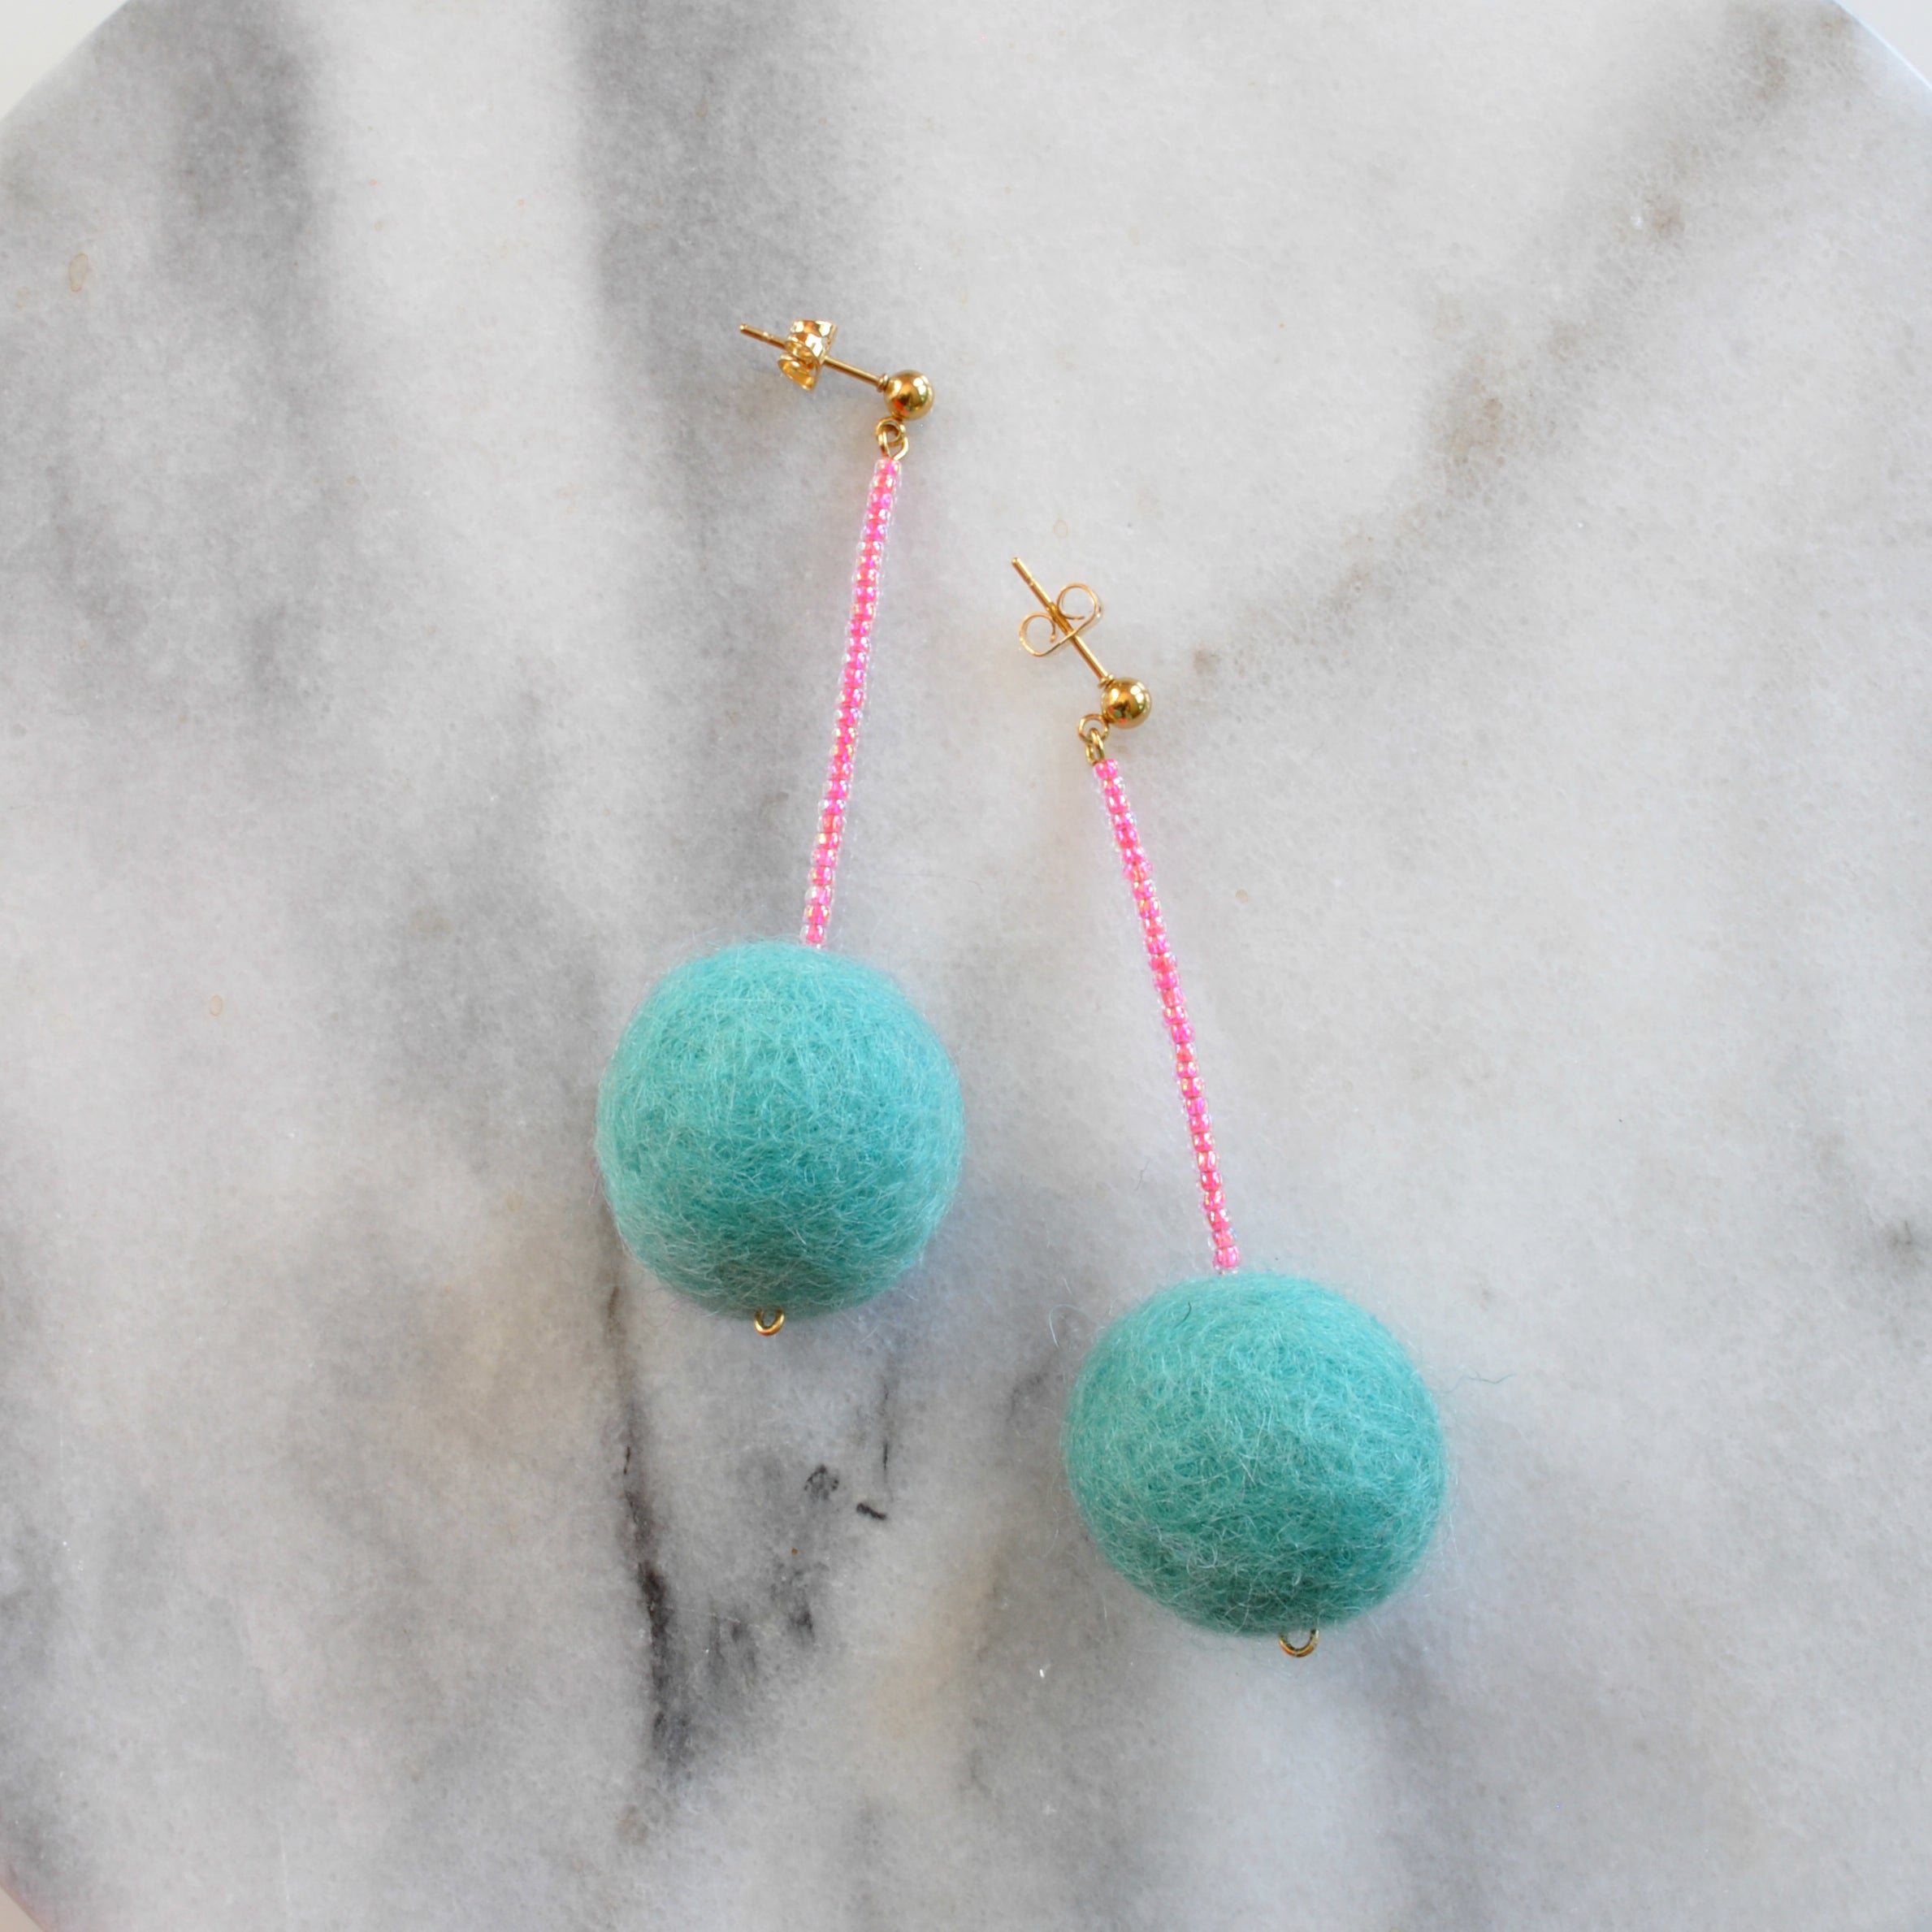 Libby & Smee pom pom earrings in Aqua with Neon Pink color  combination 